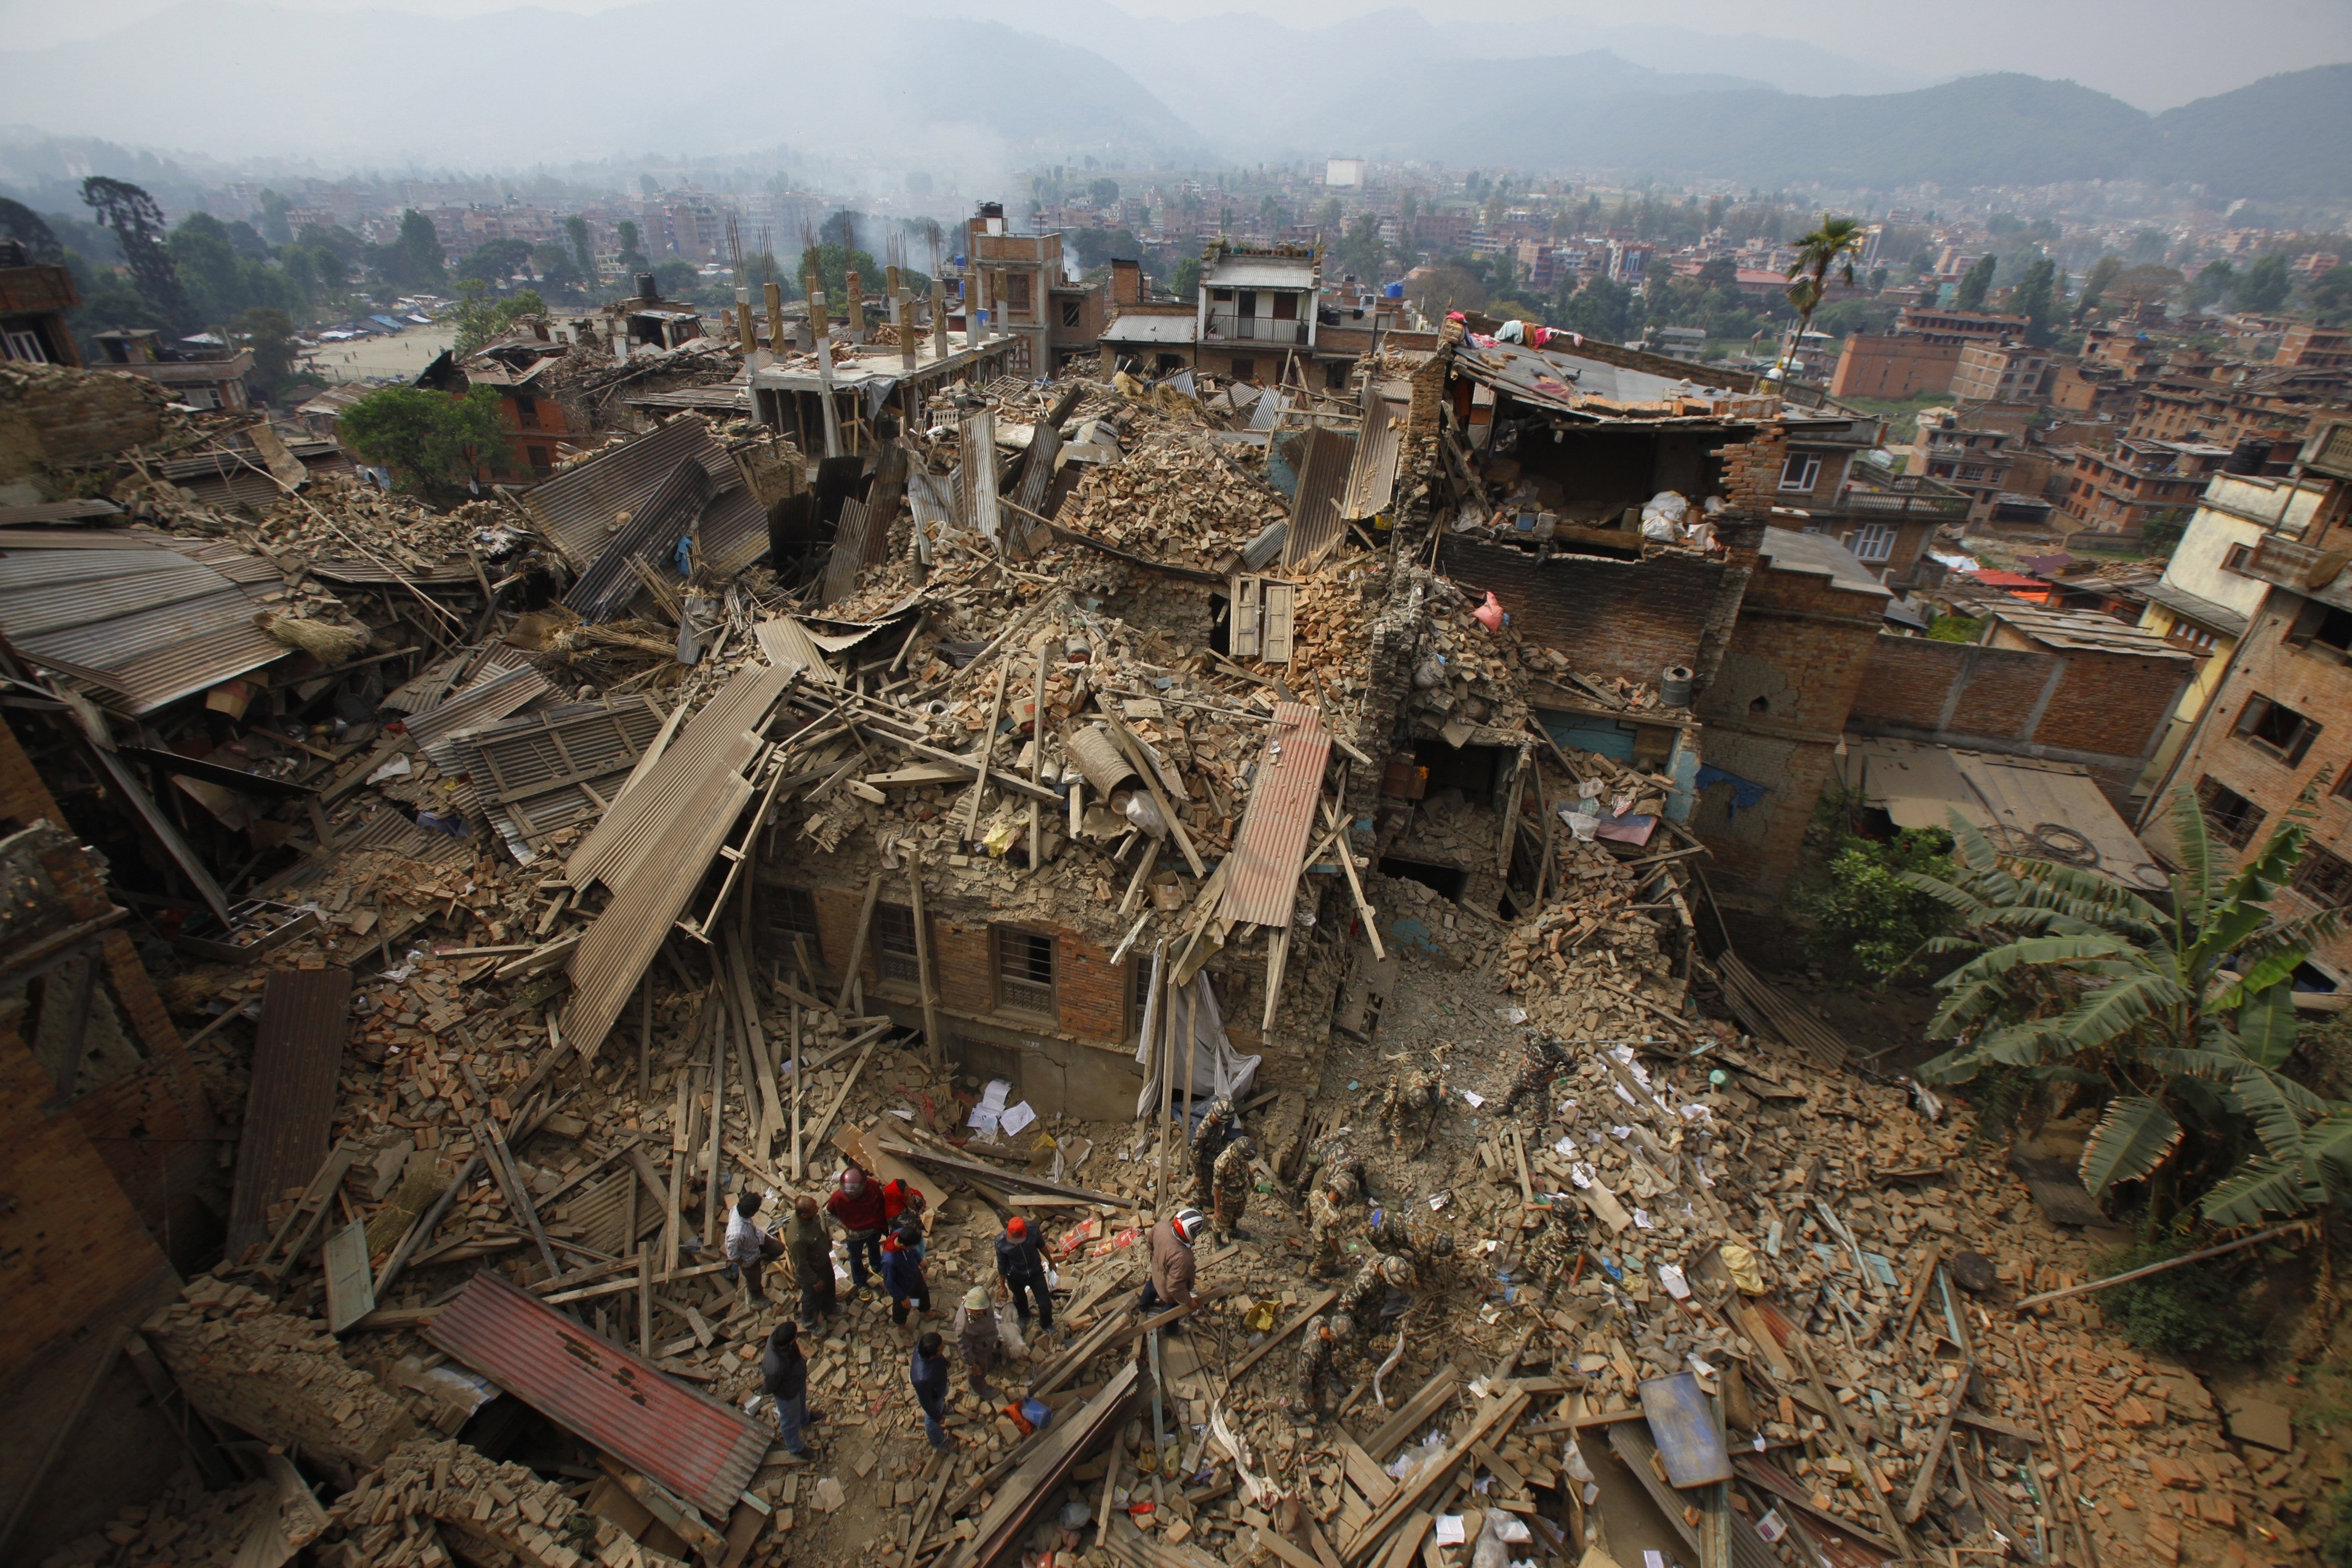 In this April 26, 2015, file photo, rescue workers remove debris as they search for victims of an earthquake in Bhaktapur near Kathmandu, Nepal. A strong magnitude earthquake shook Nepal's capital and the densely populated Kathmandu Valley before noon Saturday, causing extensive damage with toppled walls and collapsed buildings, officials said. (AP Photo/Niranjan Shrestha, File)